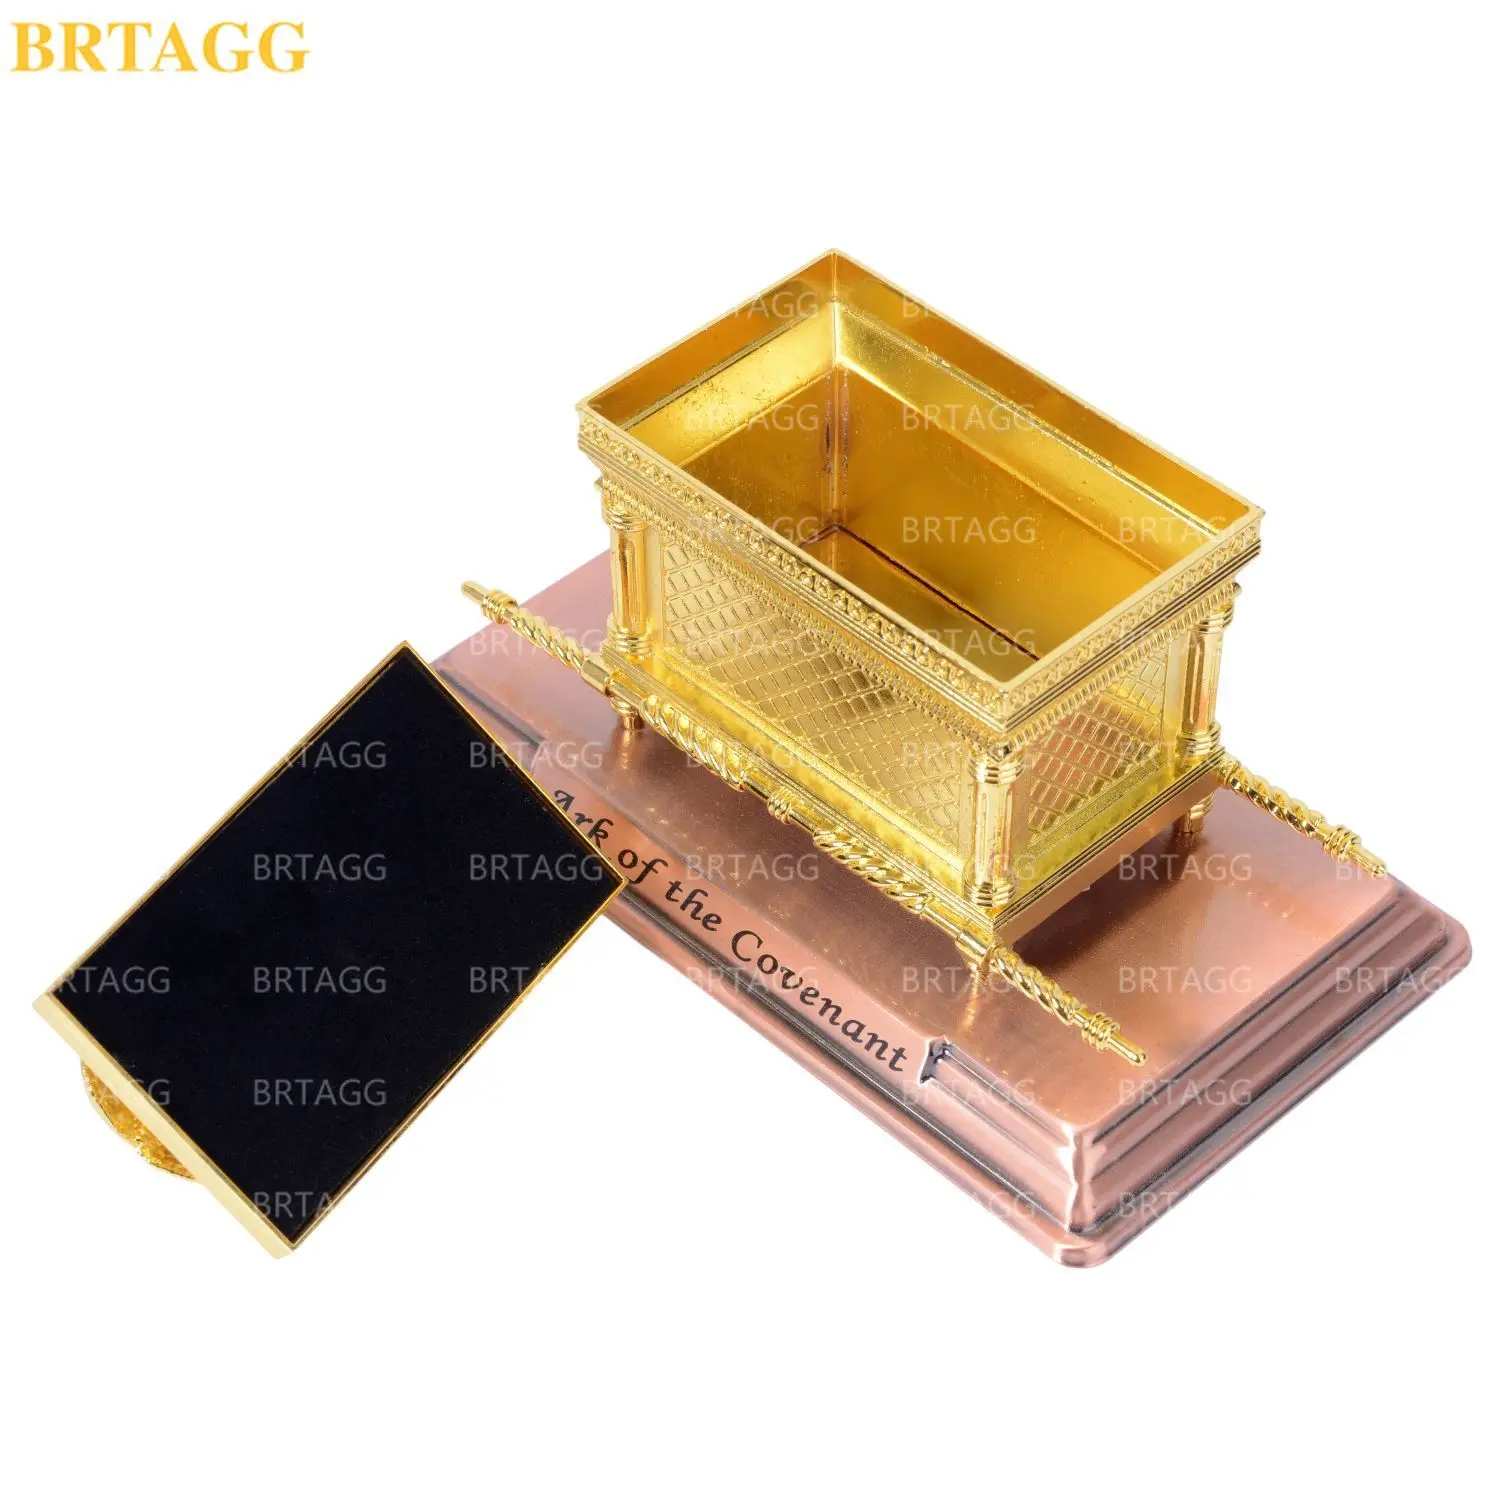 BRTAGG Metal The Ark of the Covenant Replica Statue Gold Plated With Contents Aaron's Rod / Manna / Ten Commandments Stone images - 6